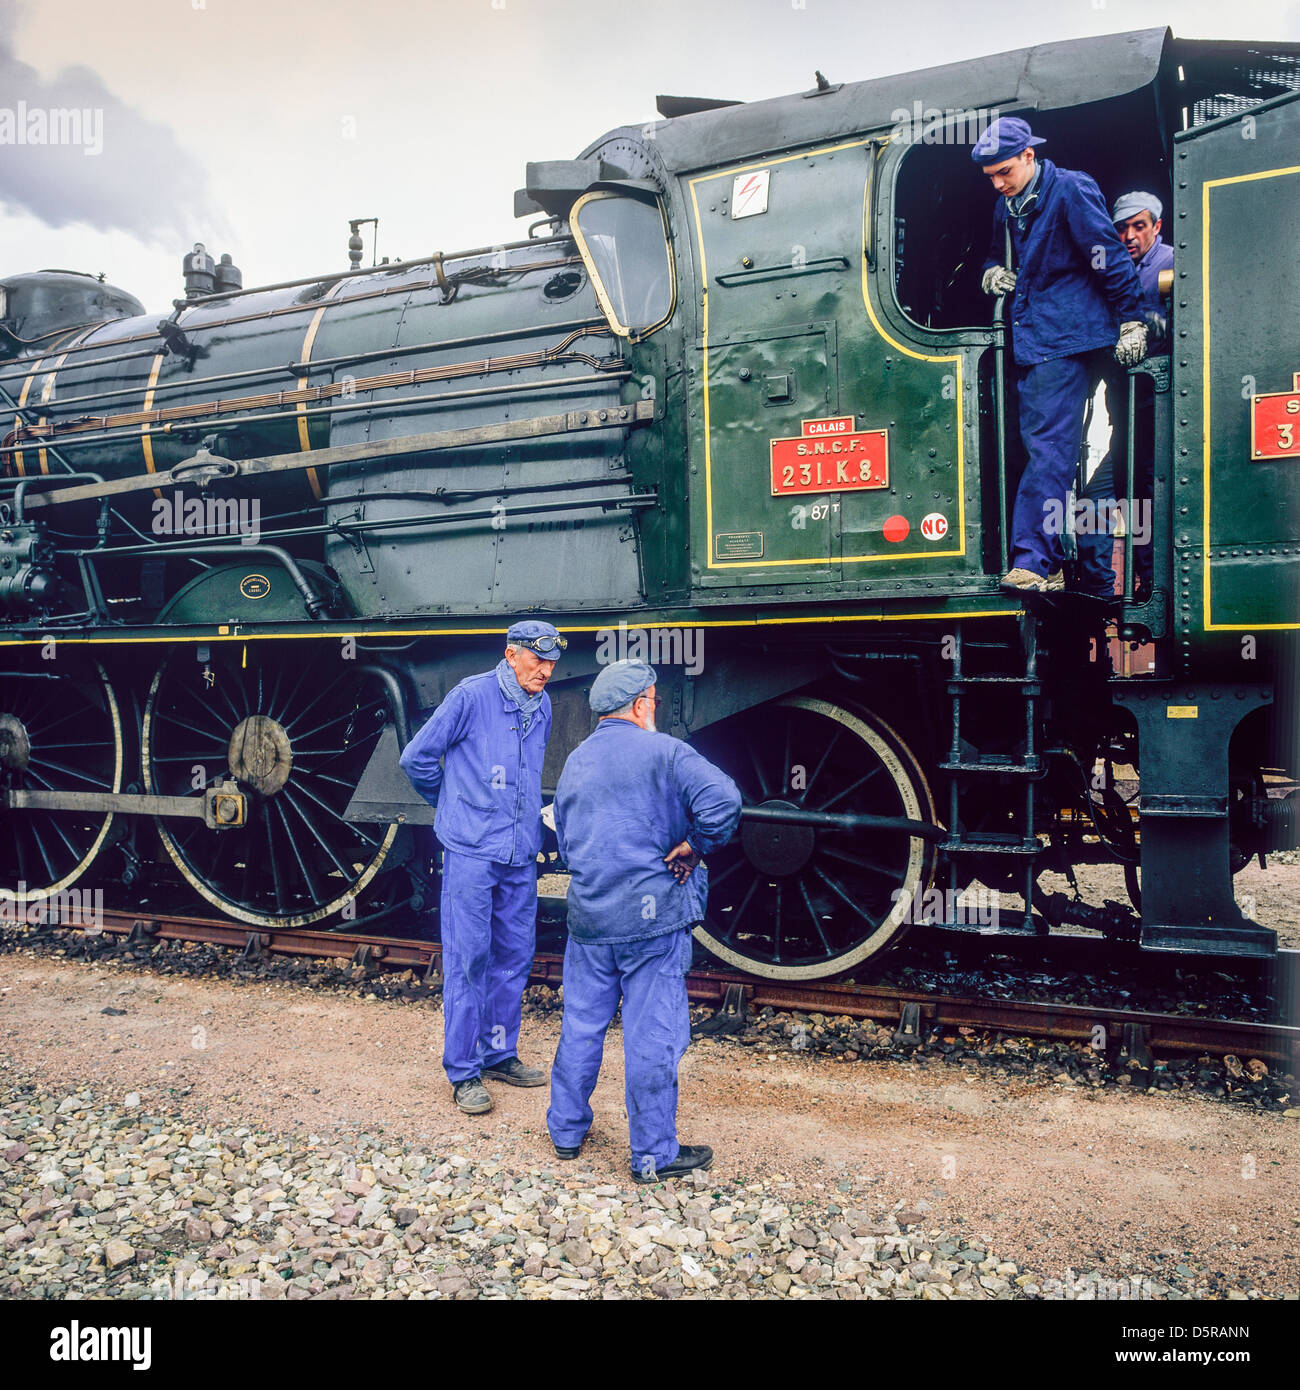 Engineers with historic steam locomotive 'Pacific PLM 231 K 8' of 'Paimpol-Pontrieux' train Brittany France Europe Stock Photo